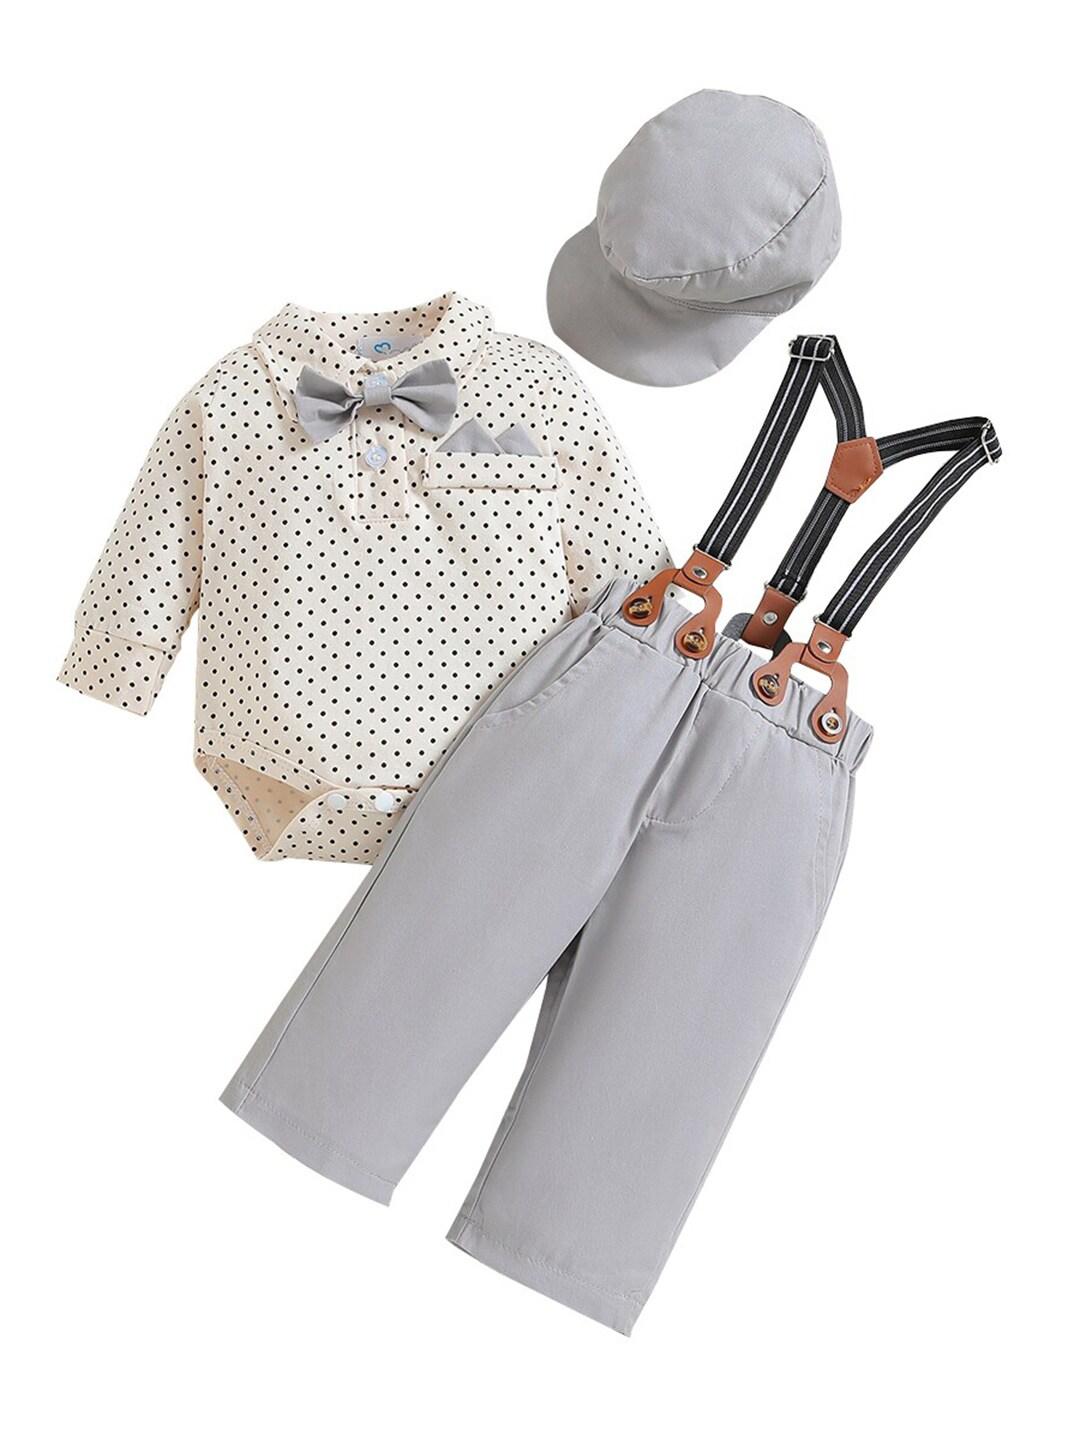 stylecast boys beige & grey printed shirt with trousers & suspenders